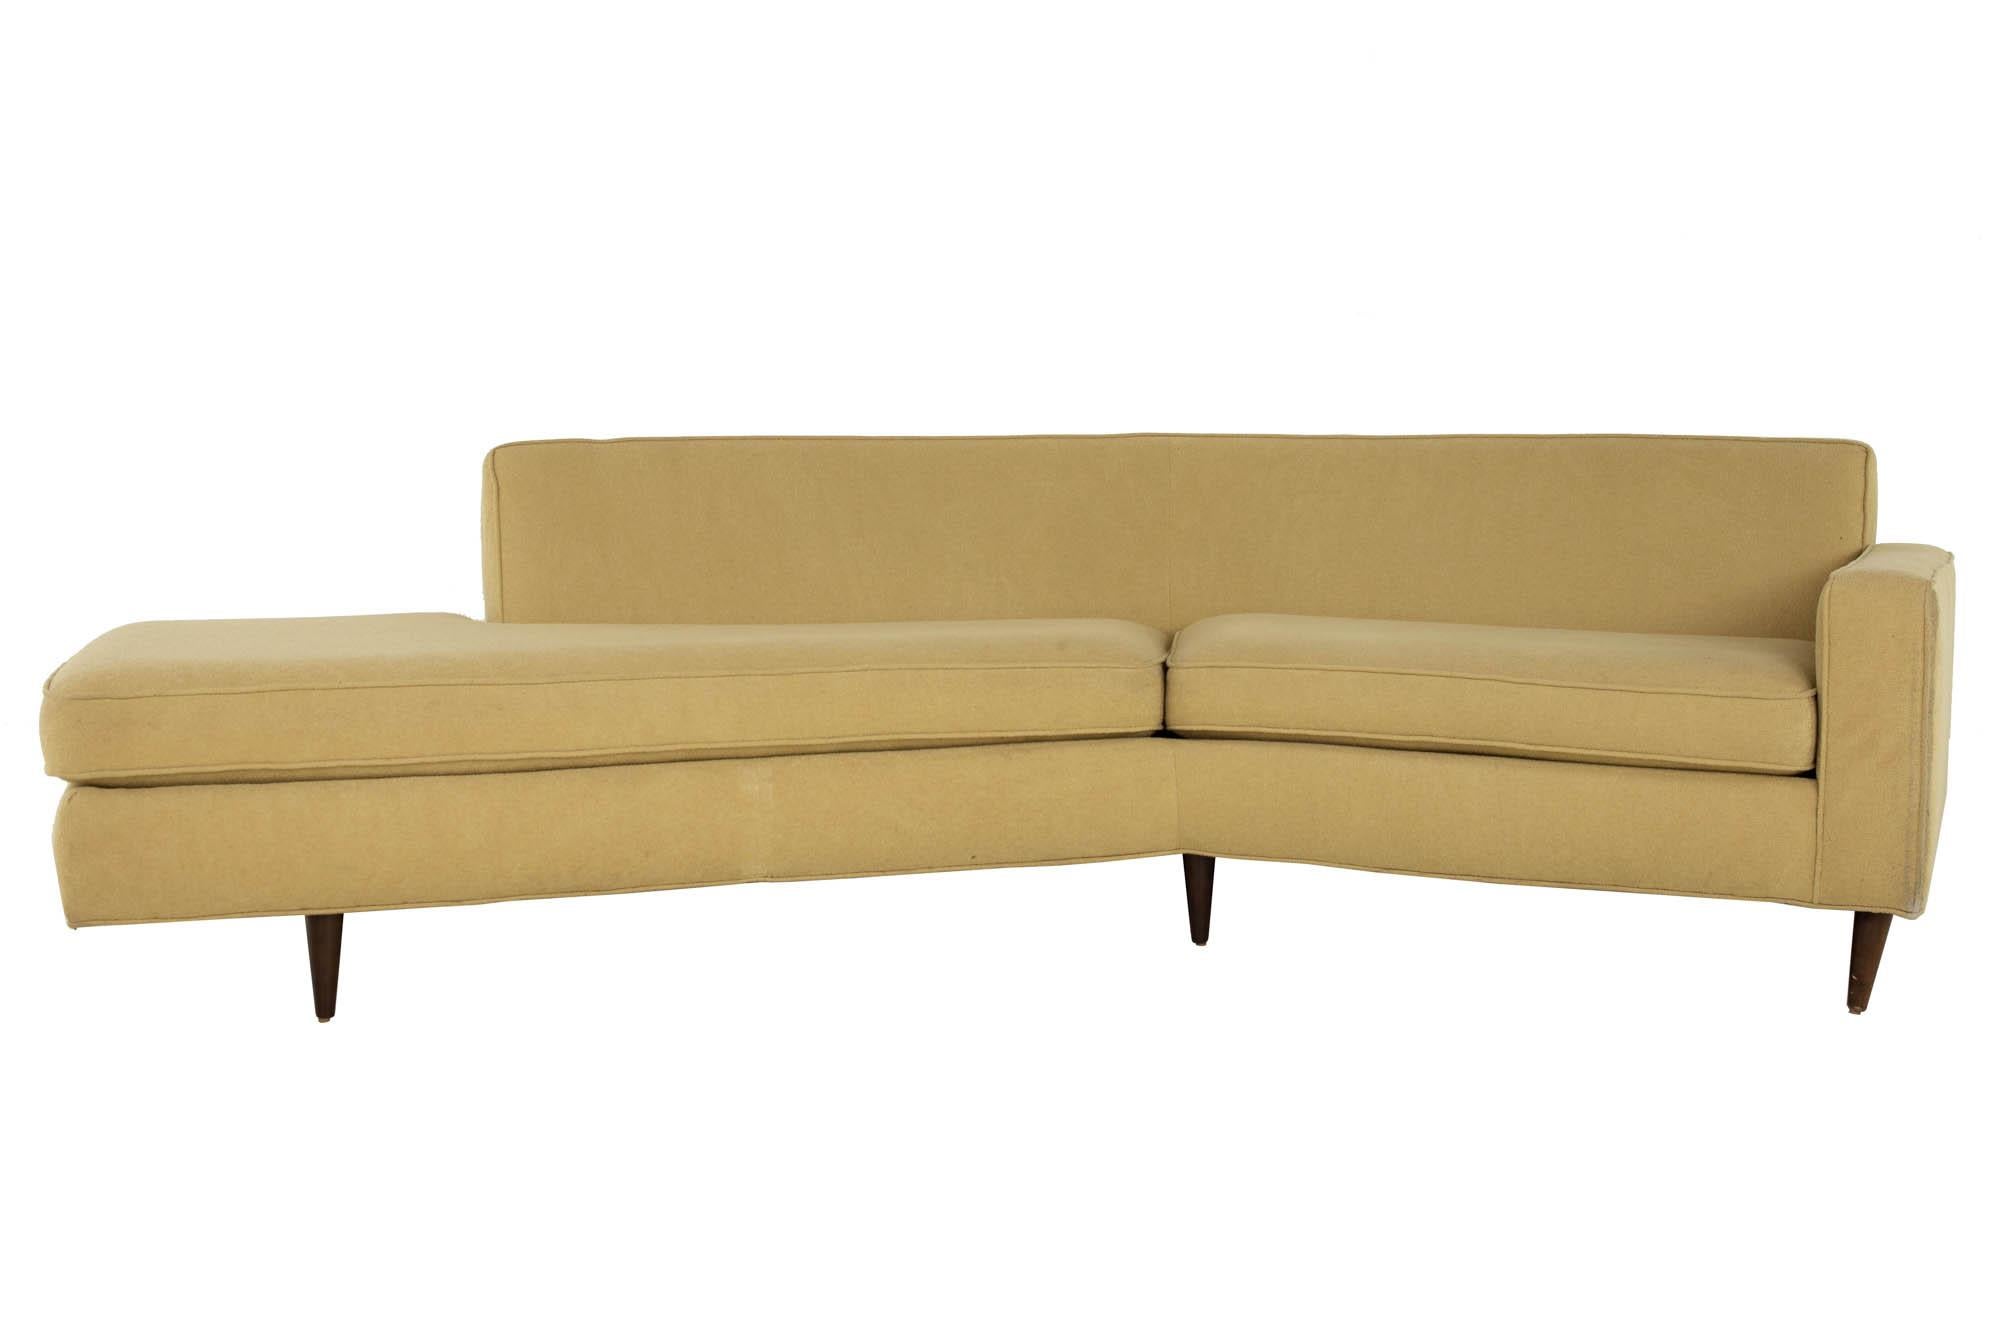 Thayer Coggin mid century angle bumper sectional sofa

Sofa measures: 115 wide x 54 deep x 30 high, with a seat height of 18.5 inches and arm height/chair clearance of 23.25 inches

?All pieces of furniture can be had in what we call restored